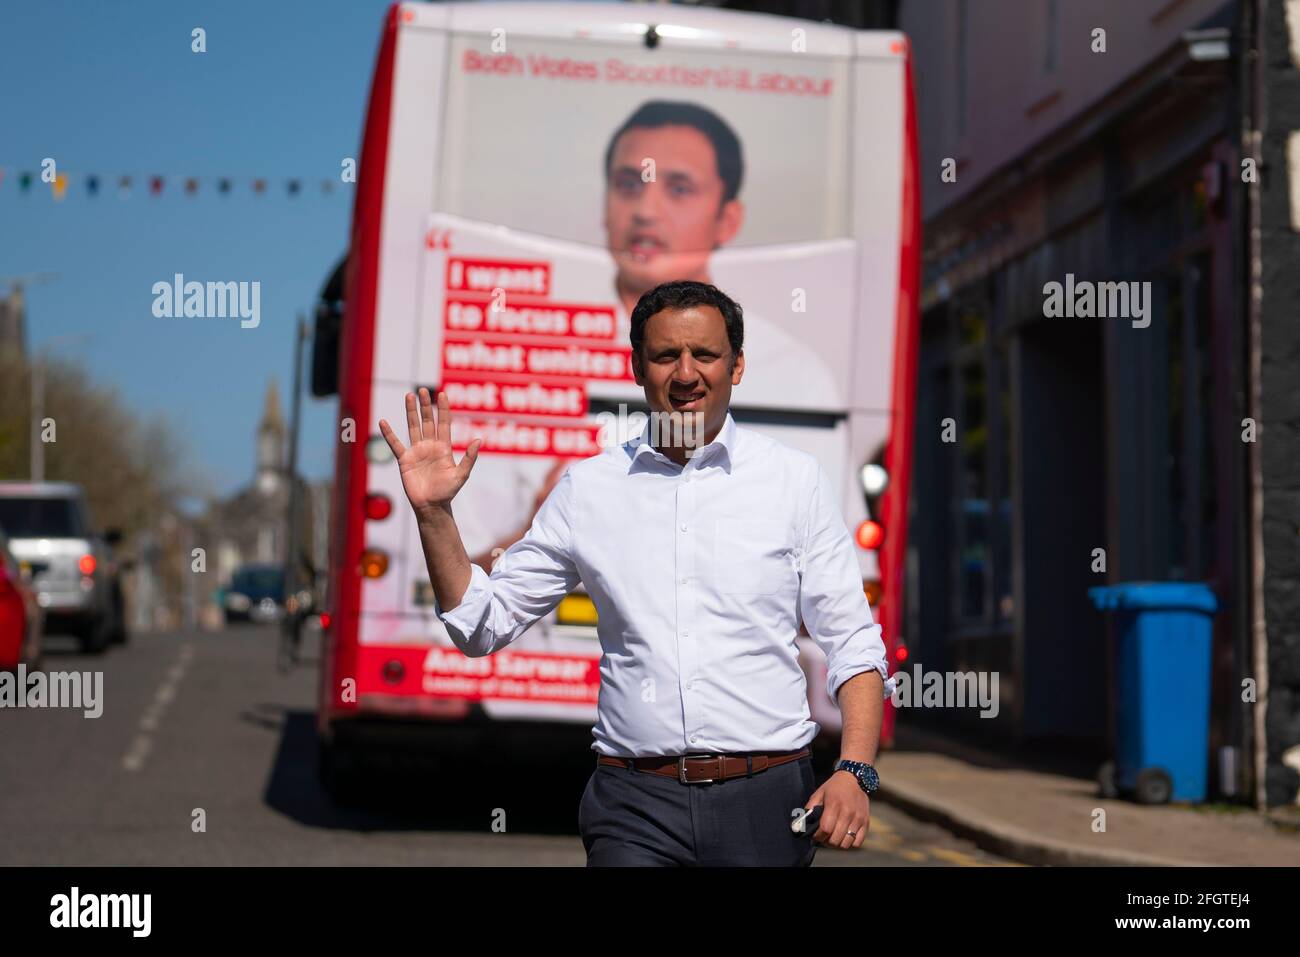 Dunfermline, Scotland, UK. 25th Apr, 2021. Scottish Labour Leader Anas Sarwar visits Dunfermline with his Mid Scotland and Fife candidates for the upcoming Scottish Parliamentary Elections and meets members of the public in Pittencrieff Park. Credit: Iain Masterton/Alamy Live News Stock Photo